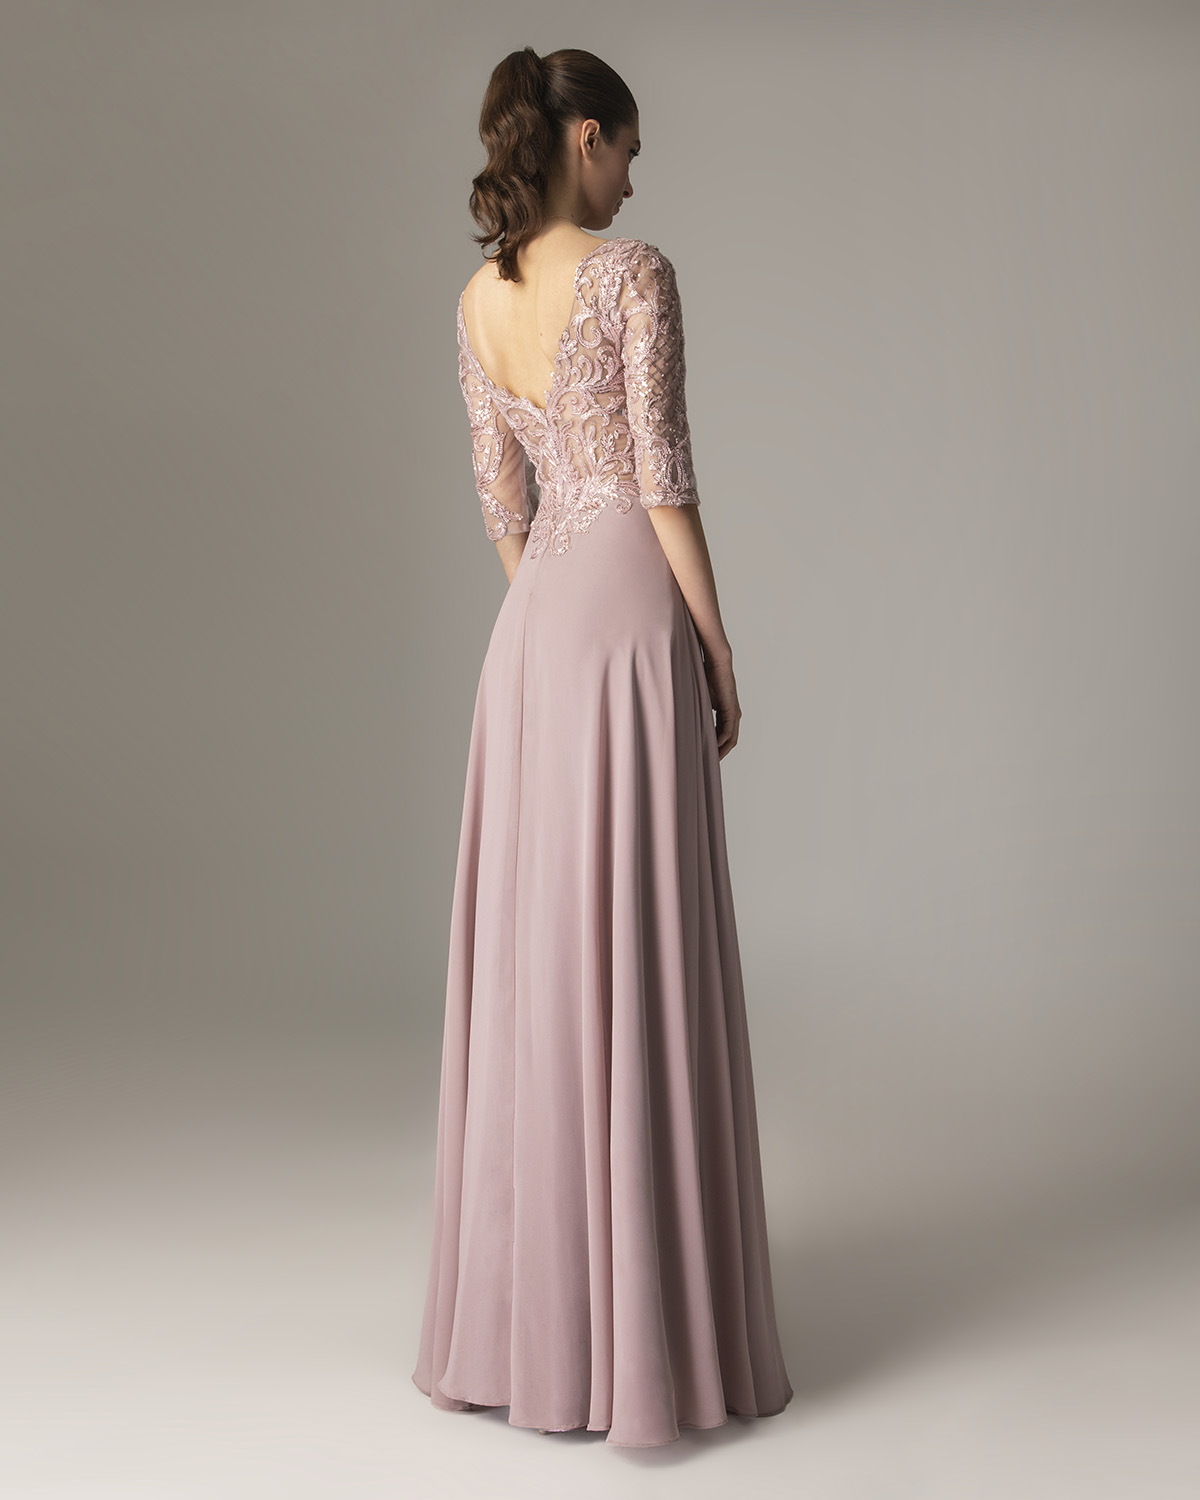 Long chiffon dress for the mother of the bride with fully beaded top and sleeves